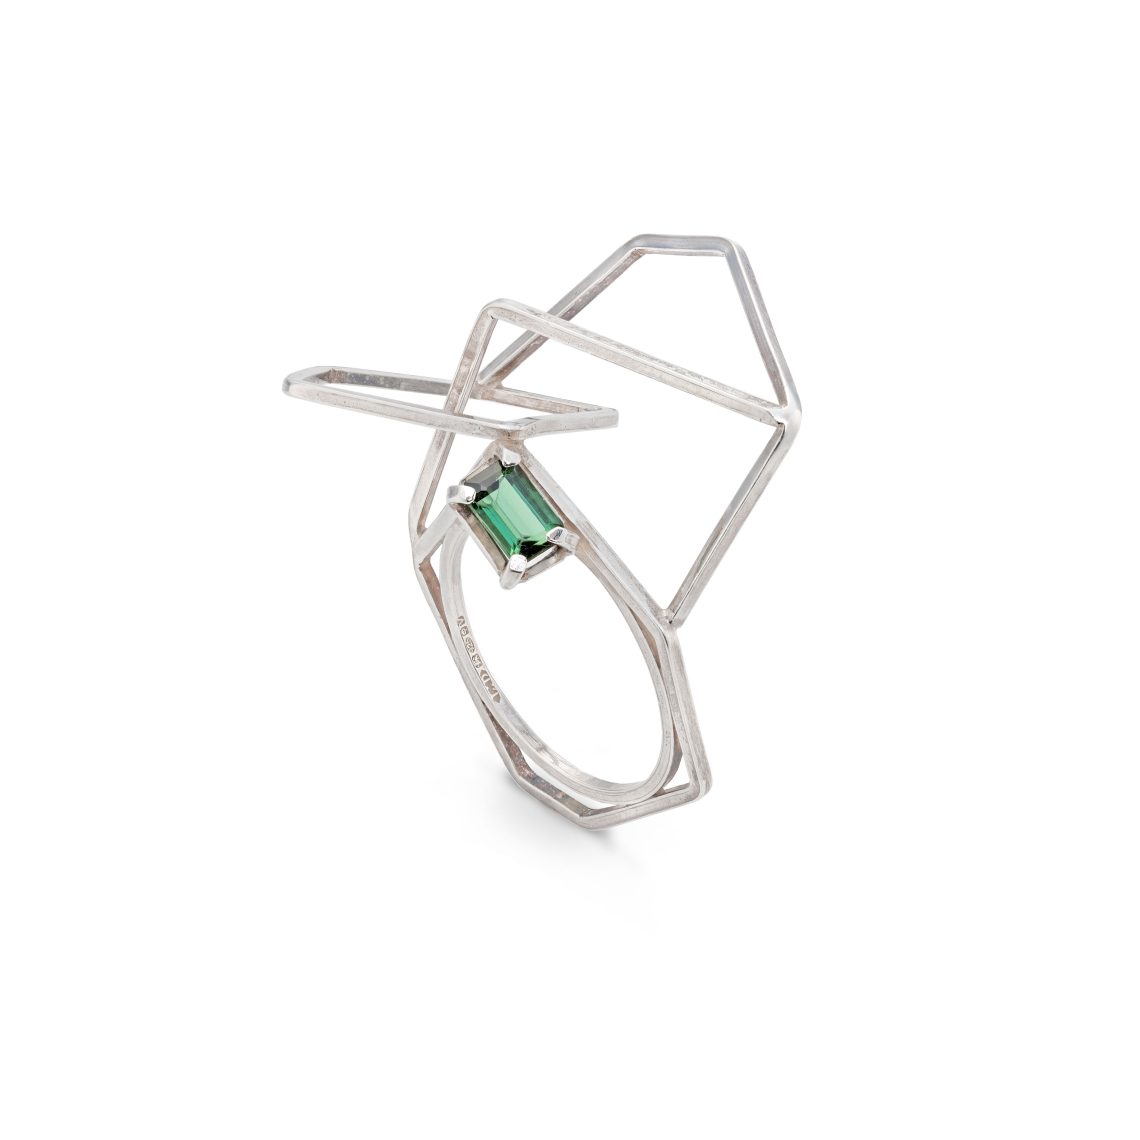 Image shows silver ring with green gem stone